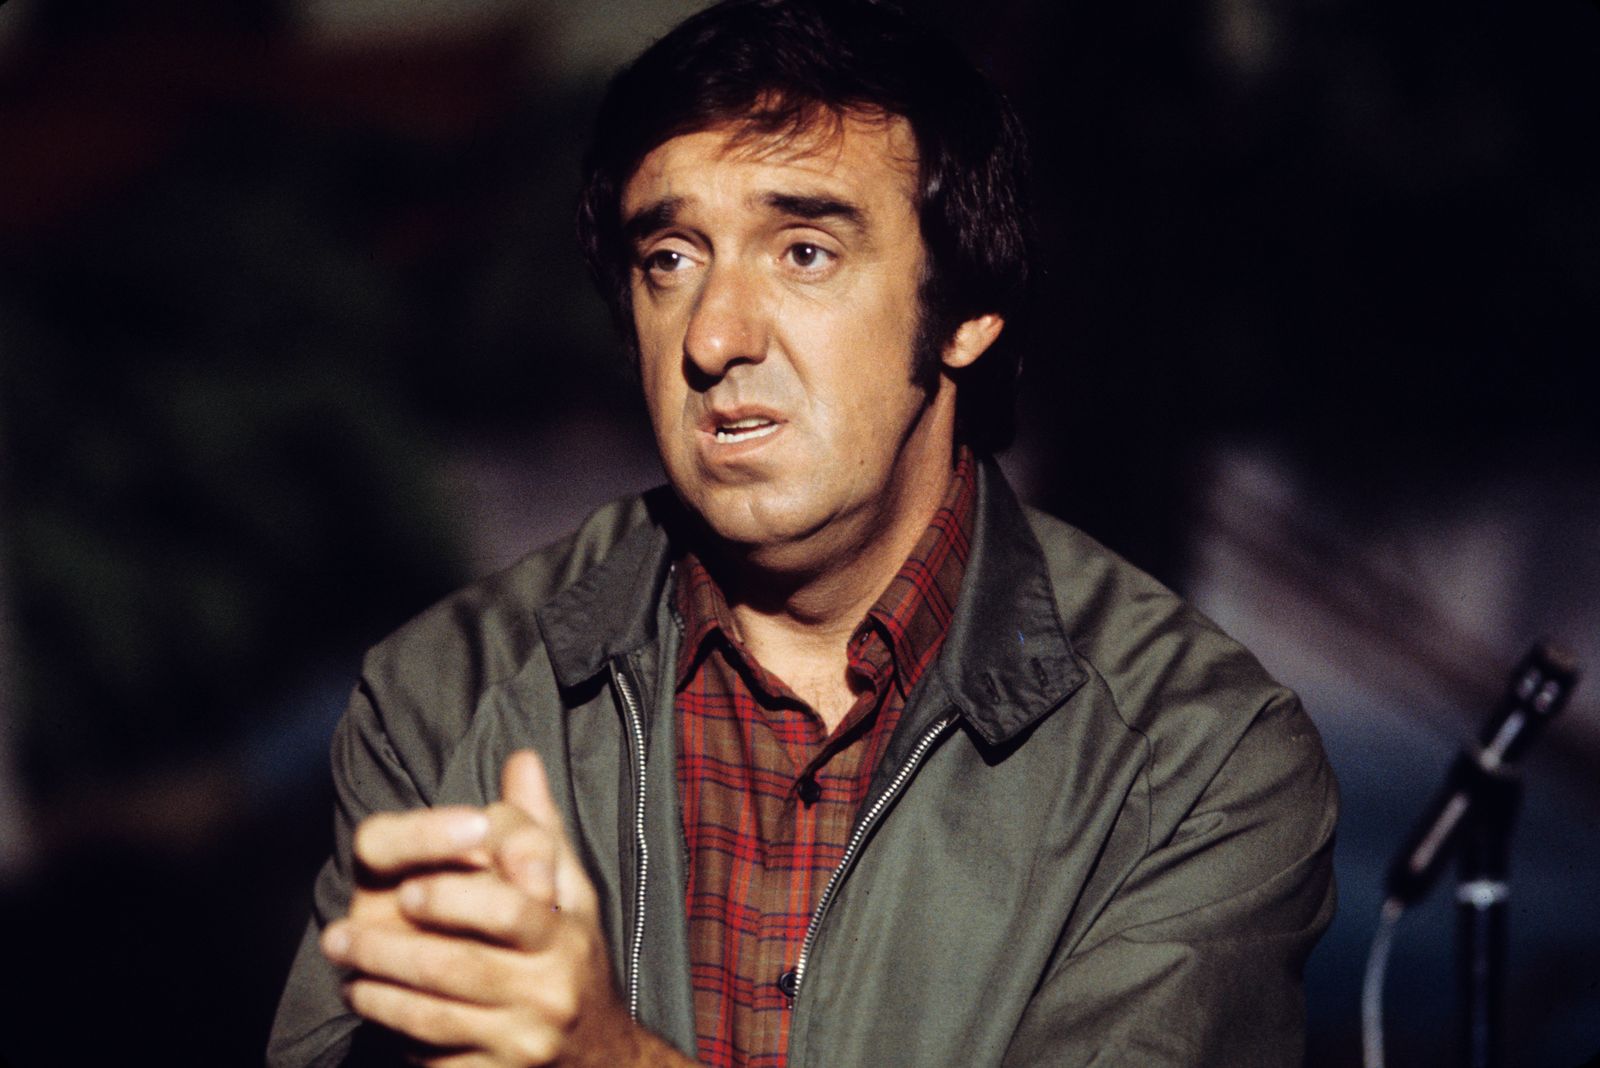 Jim Nabors on an episode of "The Rookies" on December 17, 1973. | Source: Getty Images